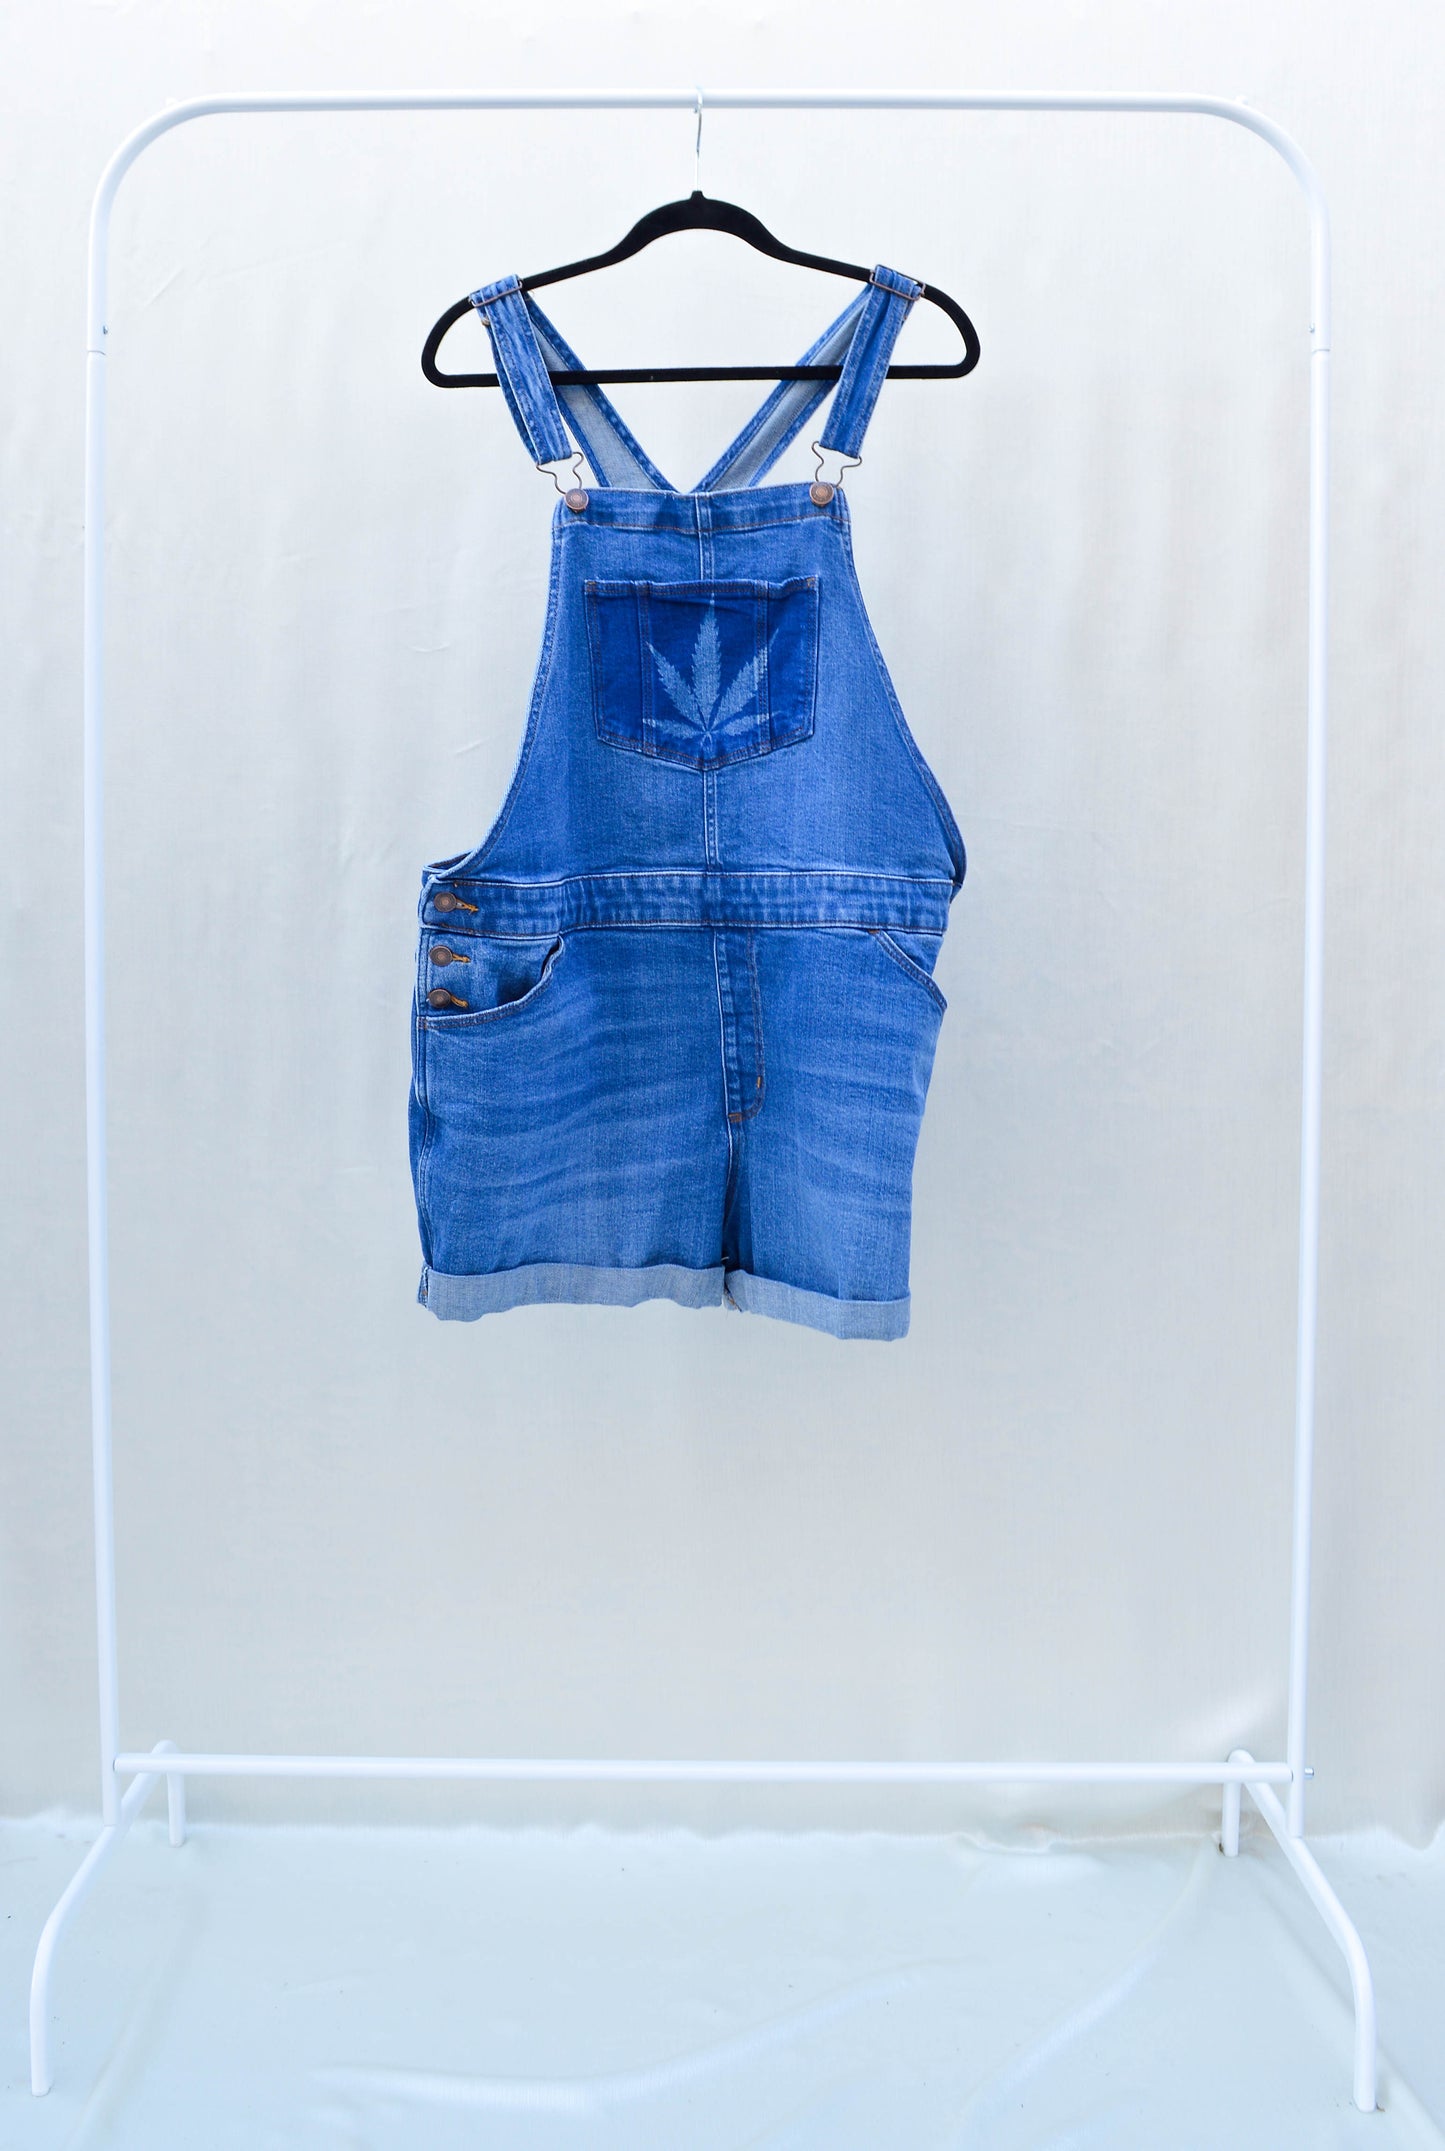 Women's X-Large Upcycled Denim Overalls